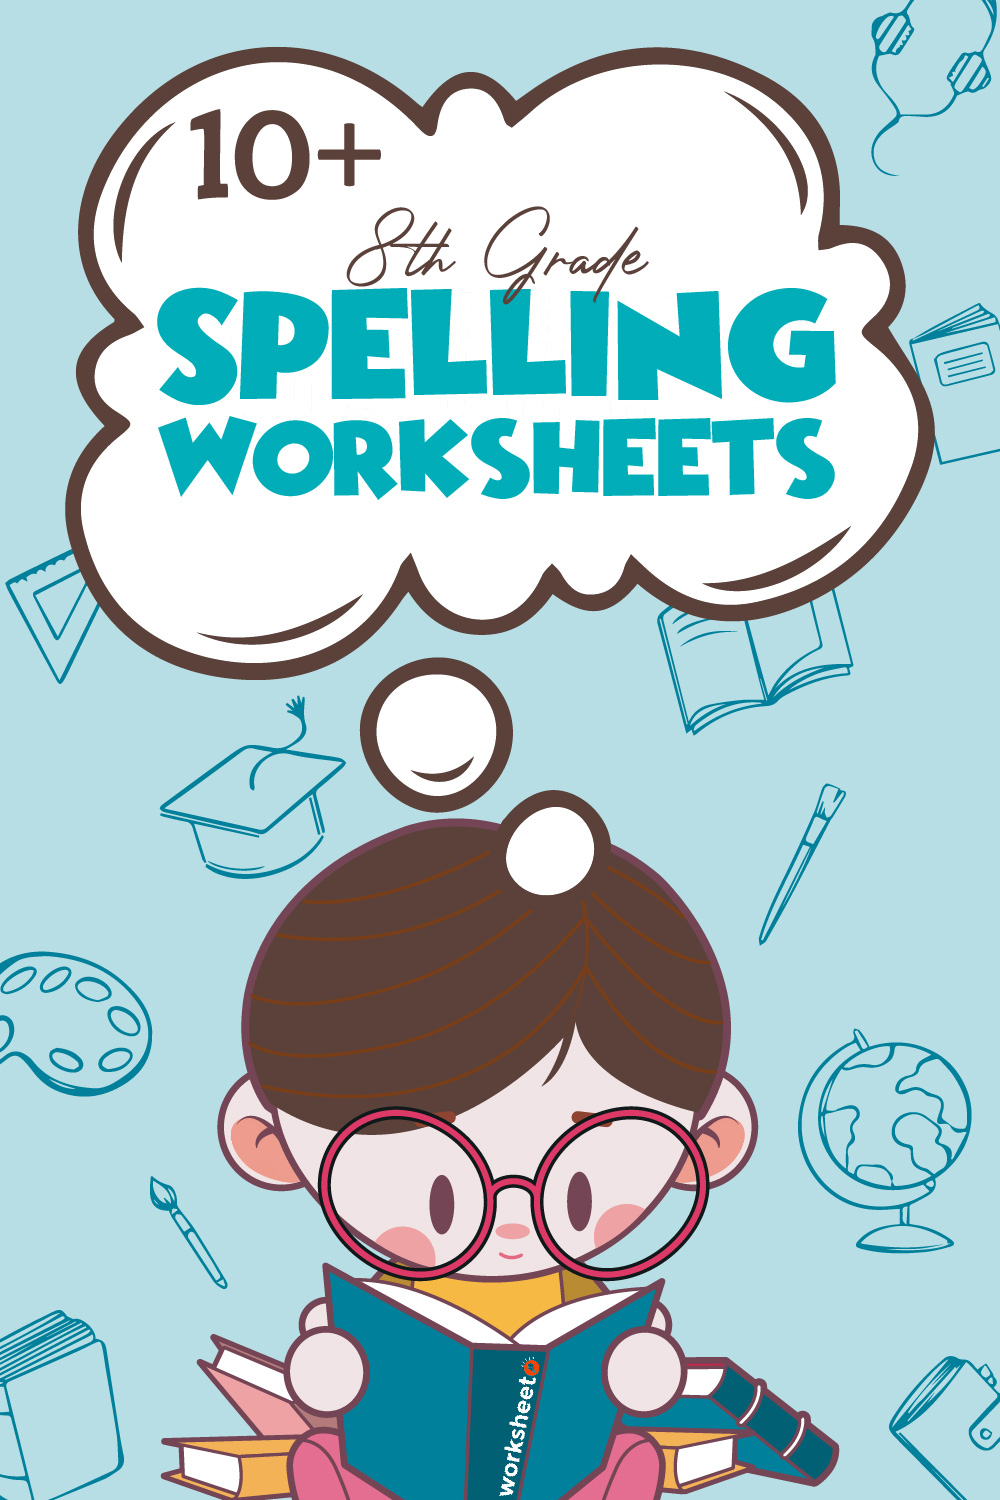 17 Images of 8th Grade Spelling Worksheets